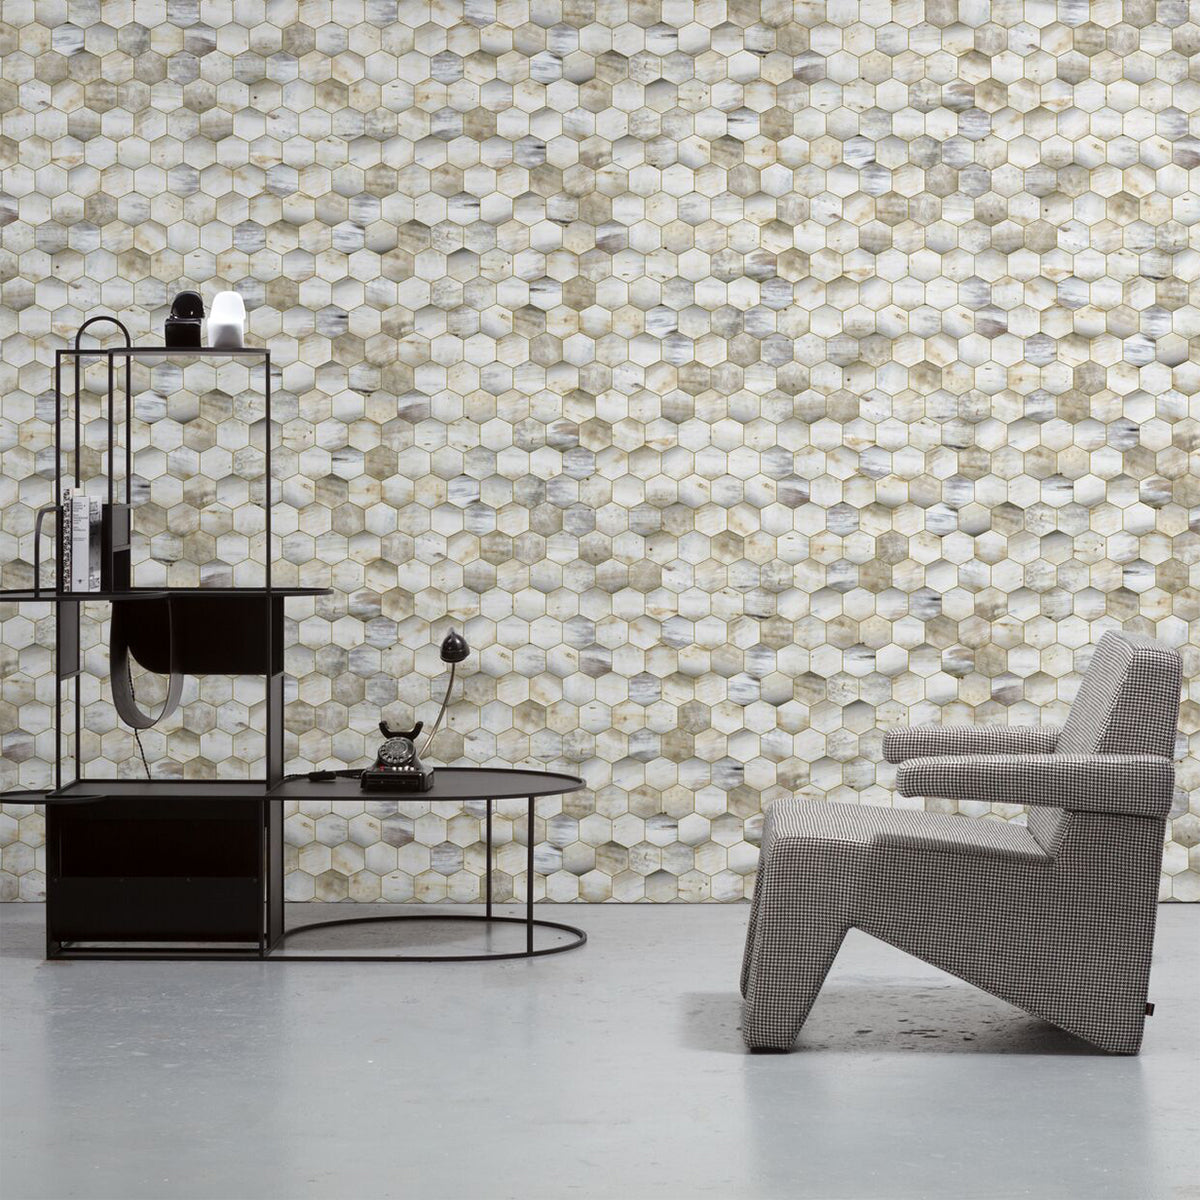 Beehive Wallpaper by Mr & Mrs Vintage for Monochrome Collection - NLXL - Do Shop